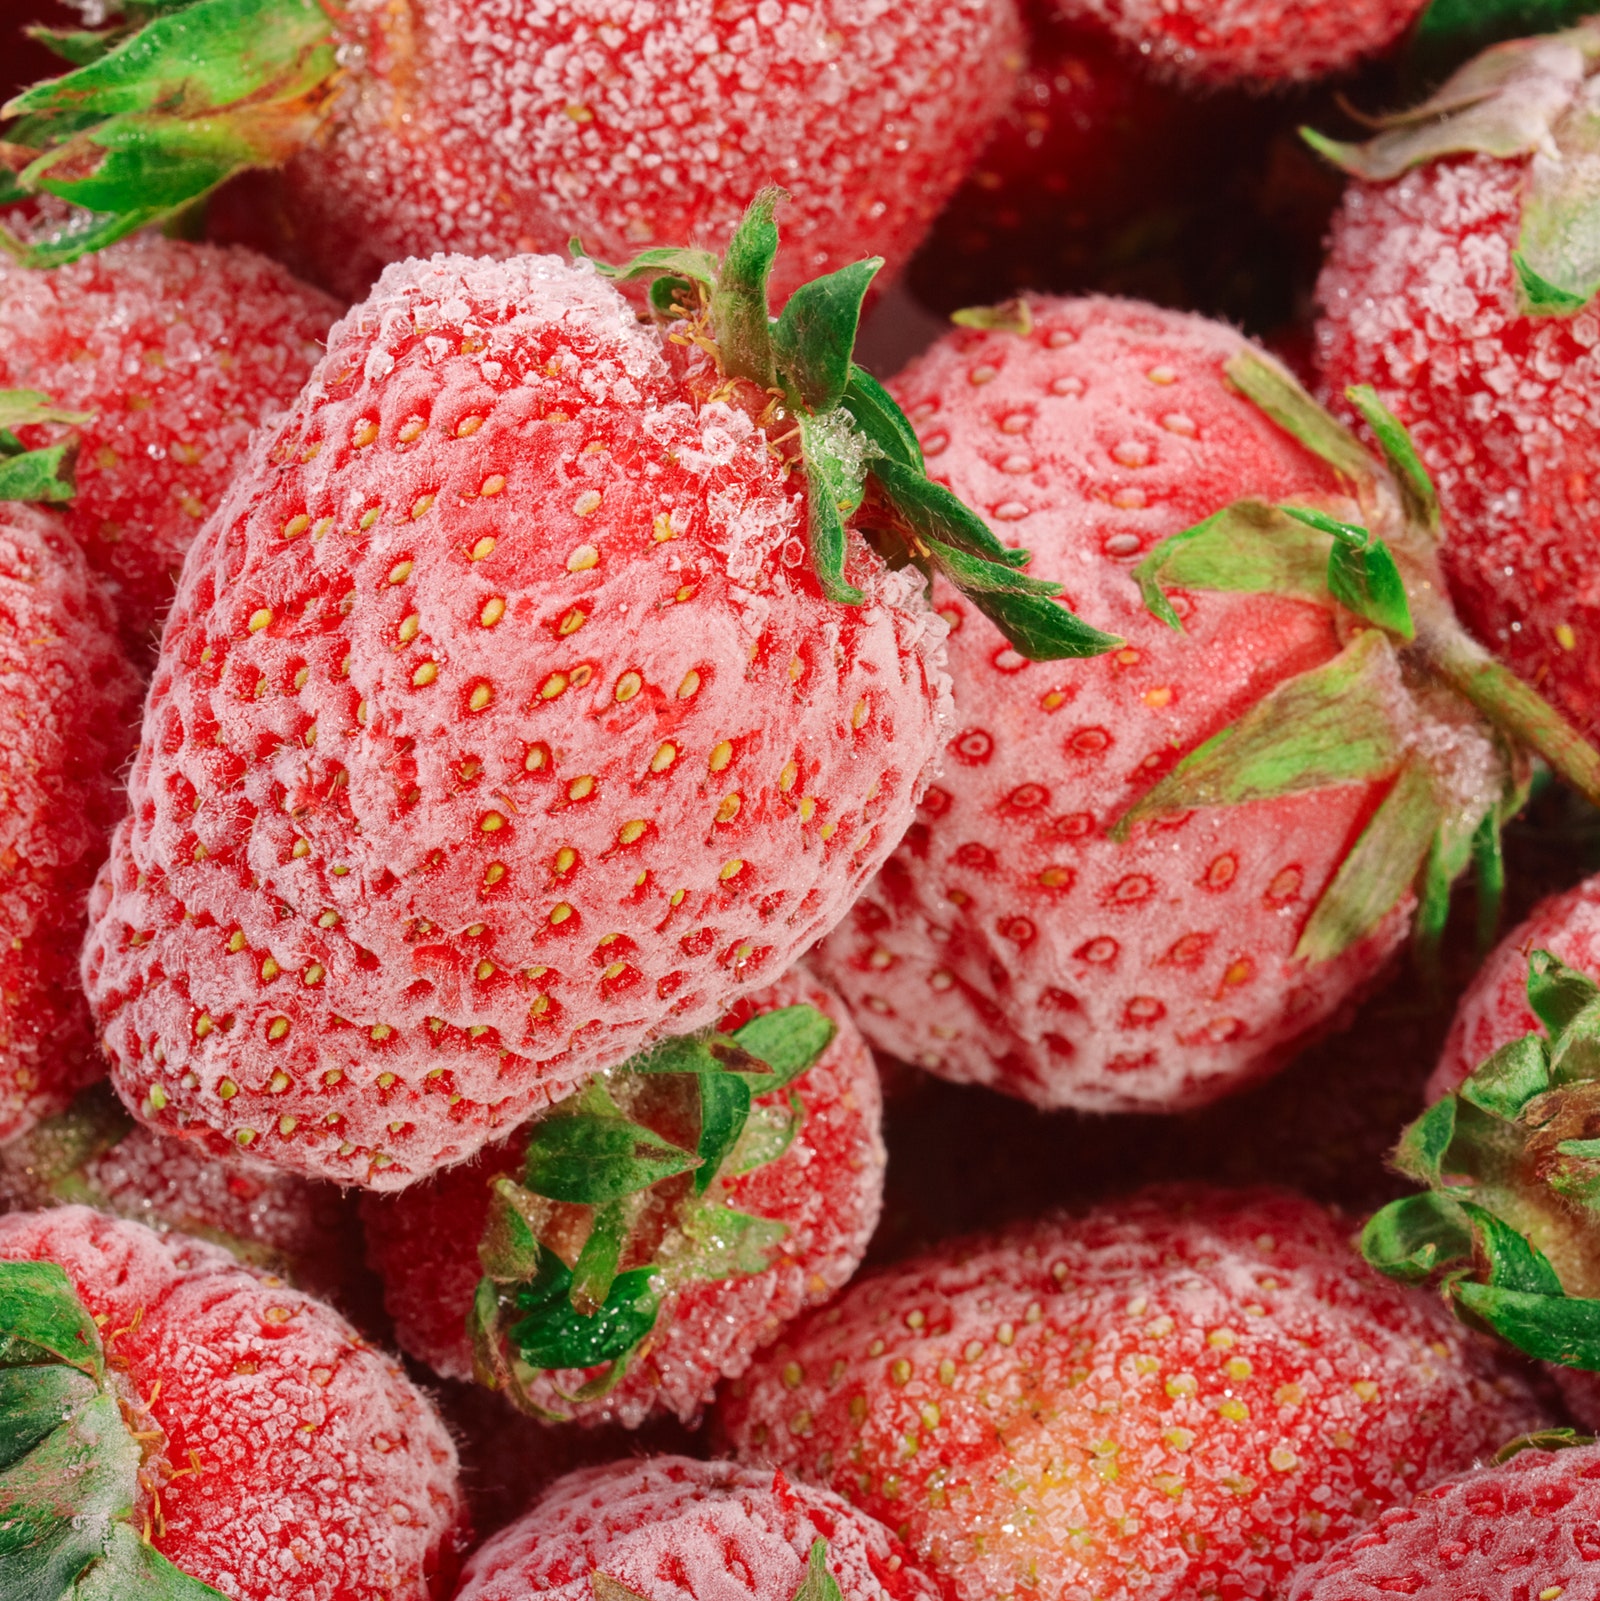 Check Your Freezer&#8212;A Bunch of Fruit From Walmart, Costco, and Other Stores Just Got Recalled